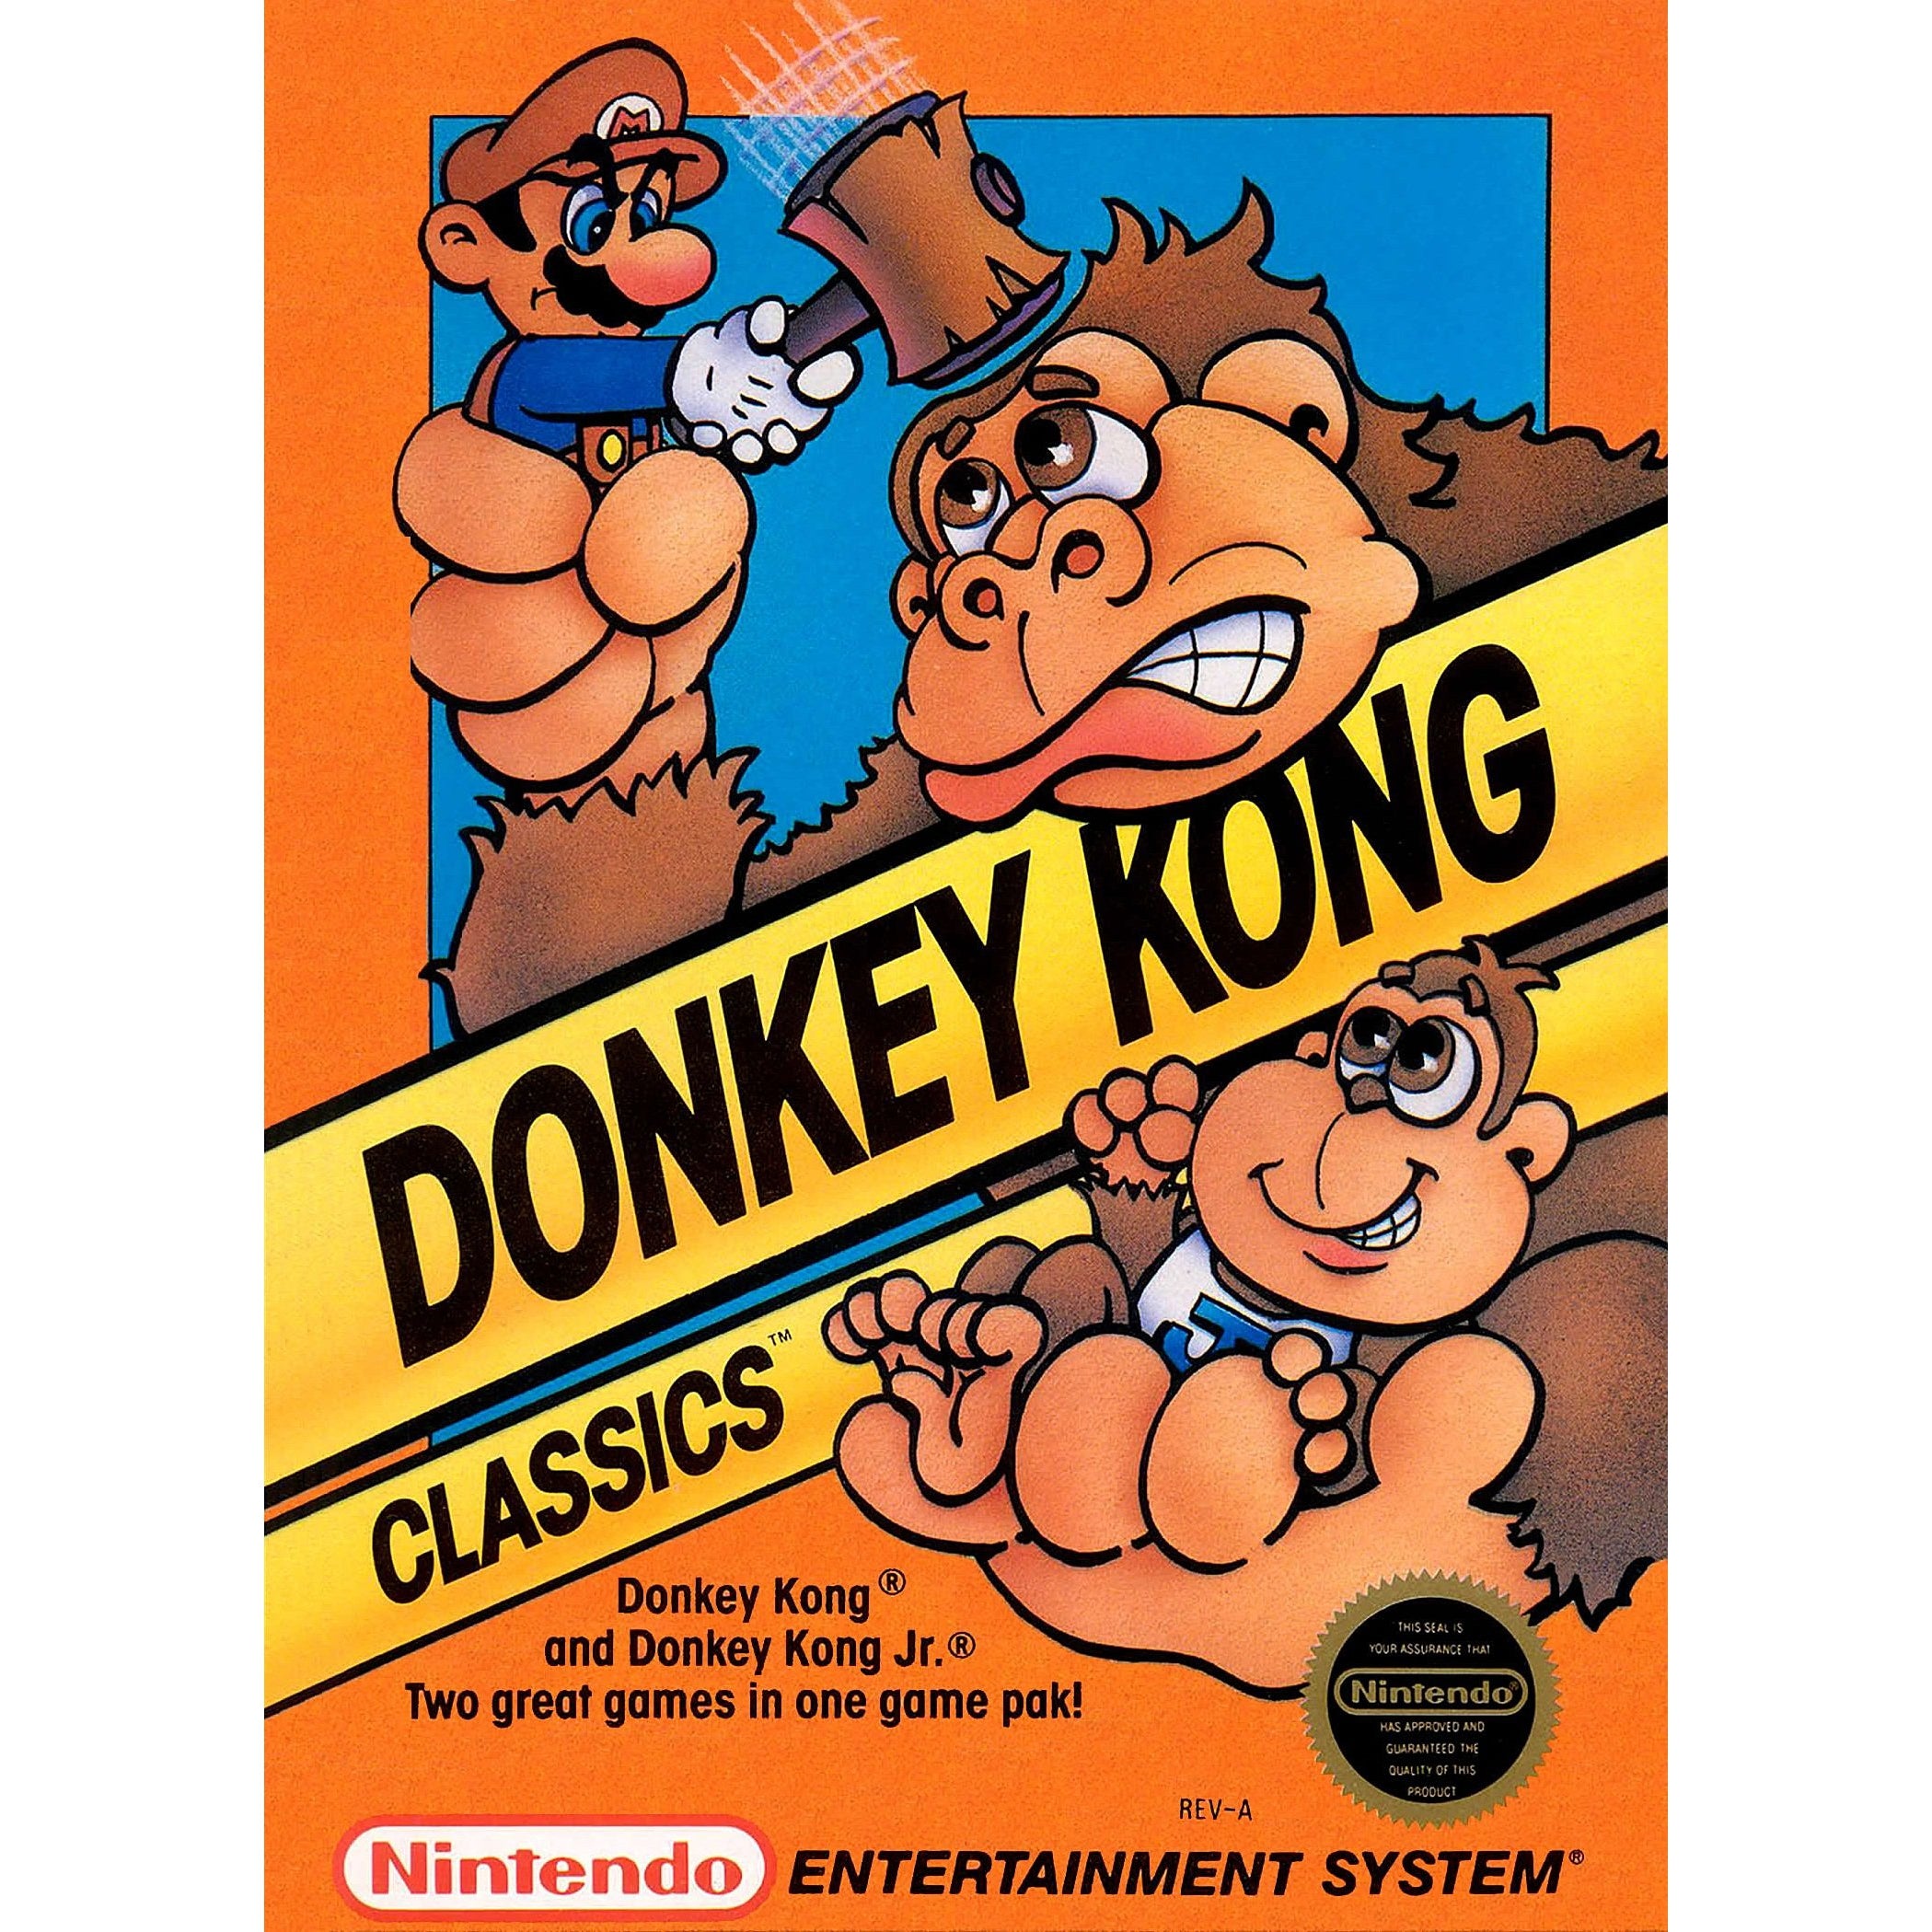 Donkey Kong Classics - Authentic NES Game Cartridge - YourGamingShop.com - Buy, Sell, Trade Video Games Online. 120 Day Warranty. Satisfaction Guaranteed.